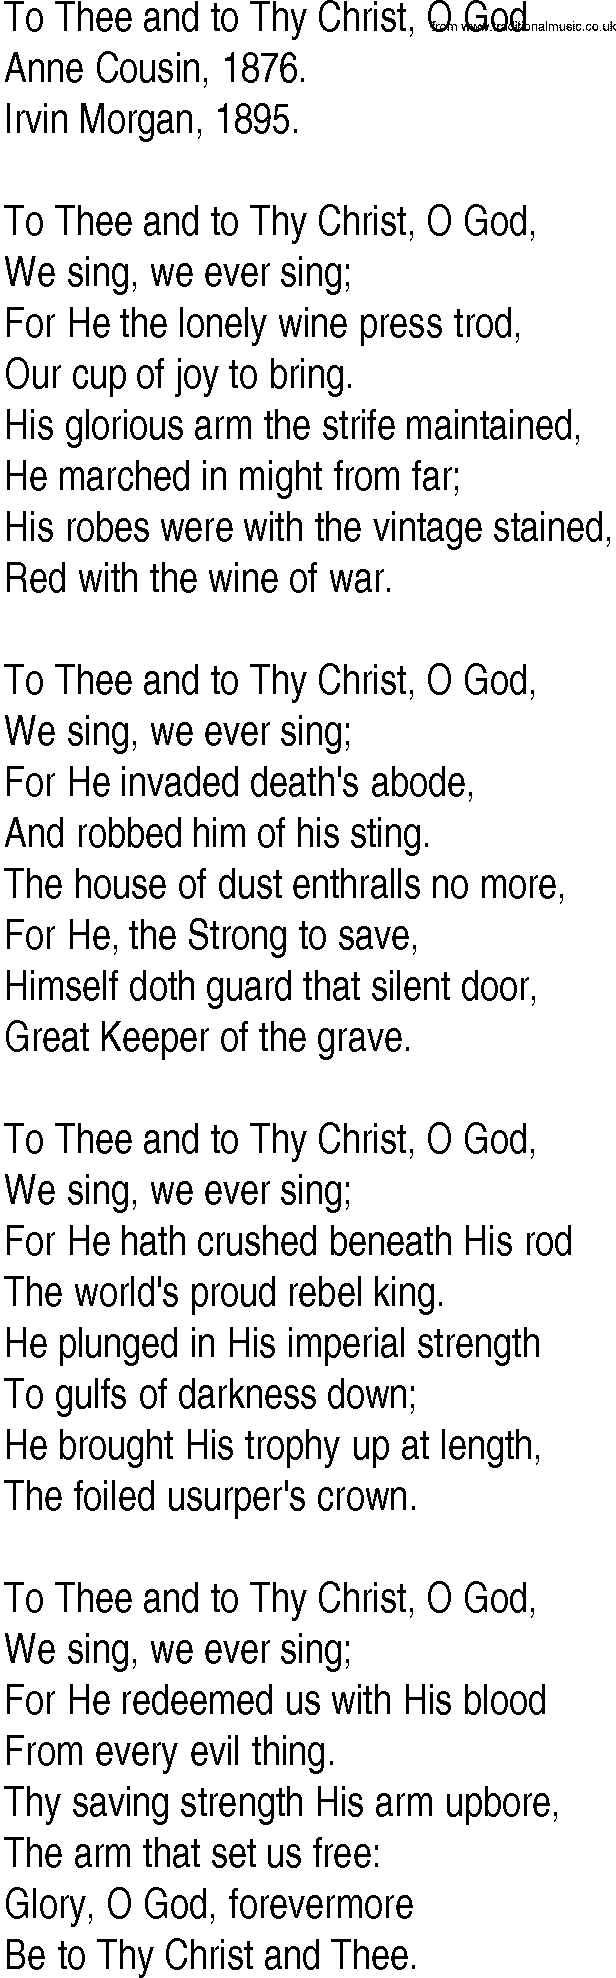 Hymn and Gospel Song: To Thee and to Thy Christ, O God by Anne Cousin lyrics